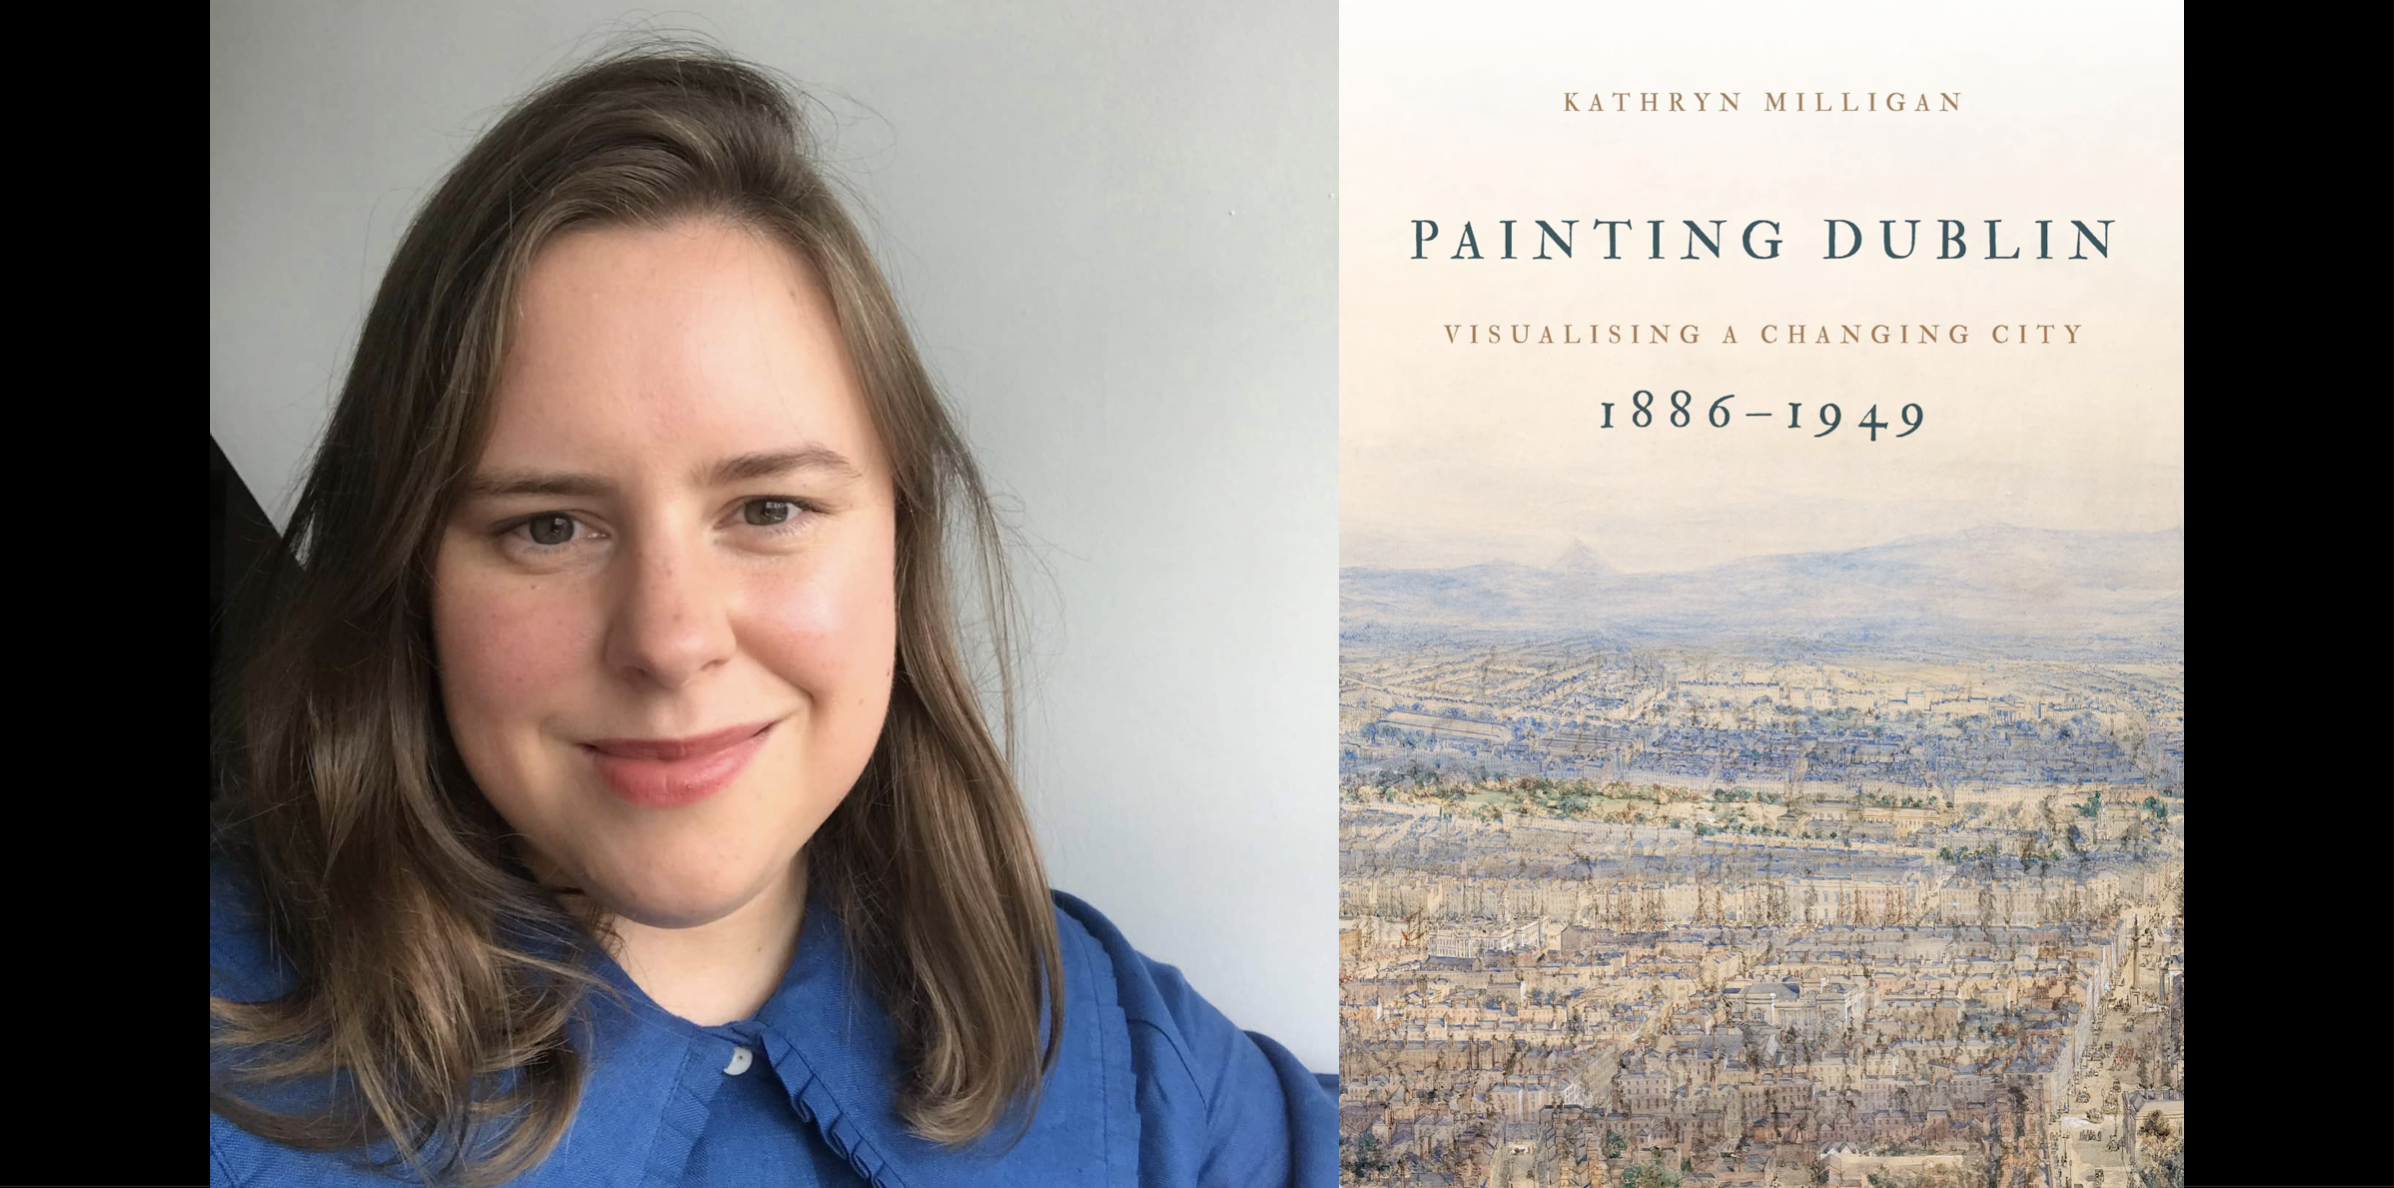 Photo of Kathryn Milligan beside cover of her book, 'Painting Dublin,' featuring birds eye view of old Dublin city